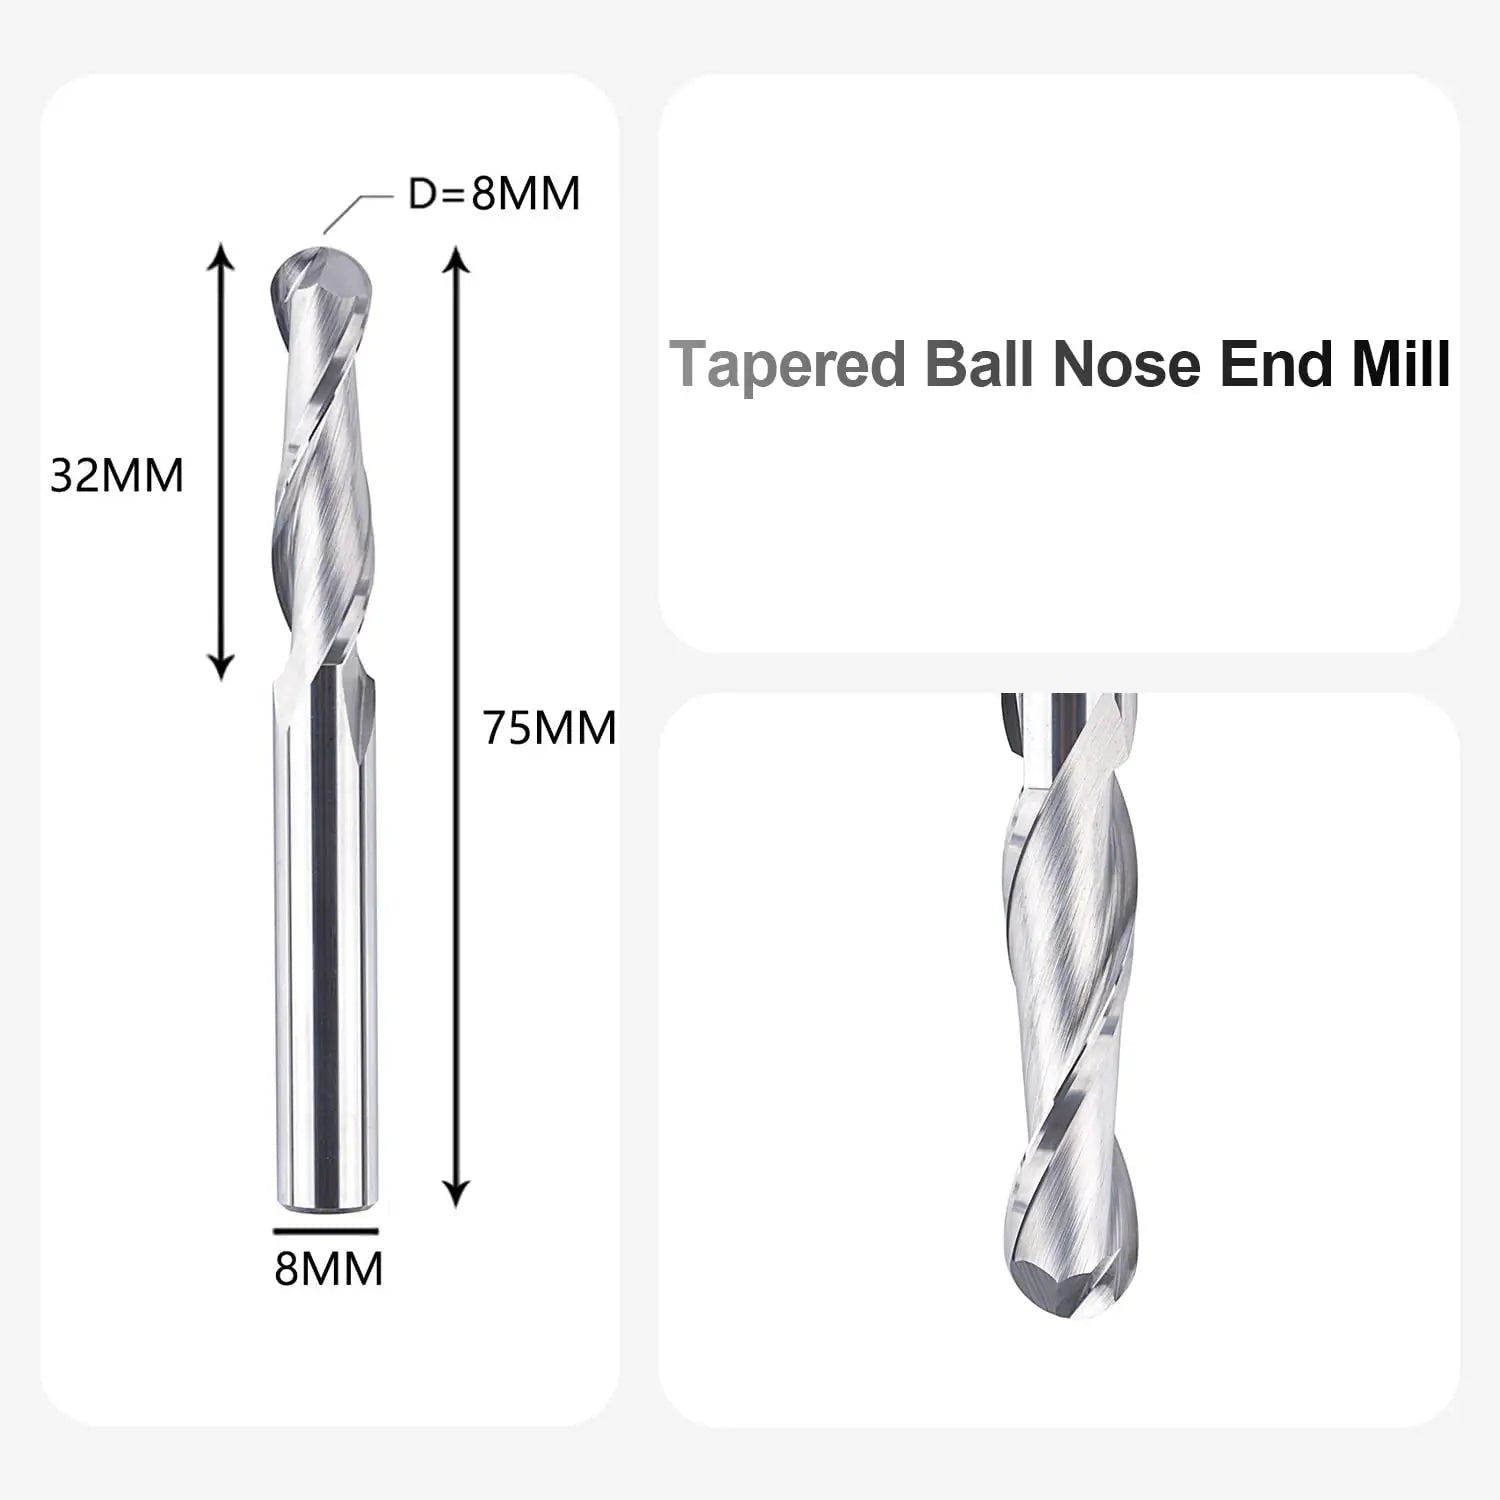 SpeTool EU Ball End Mill 8 mm Cutting Diameter 8 mm Shank 32 mm Cutting Length Double Flute Router Bit Solid Carbide Milling Cutter for DIY Woodworking Carving Engraving